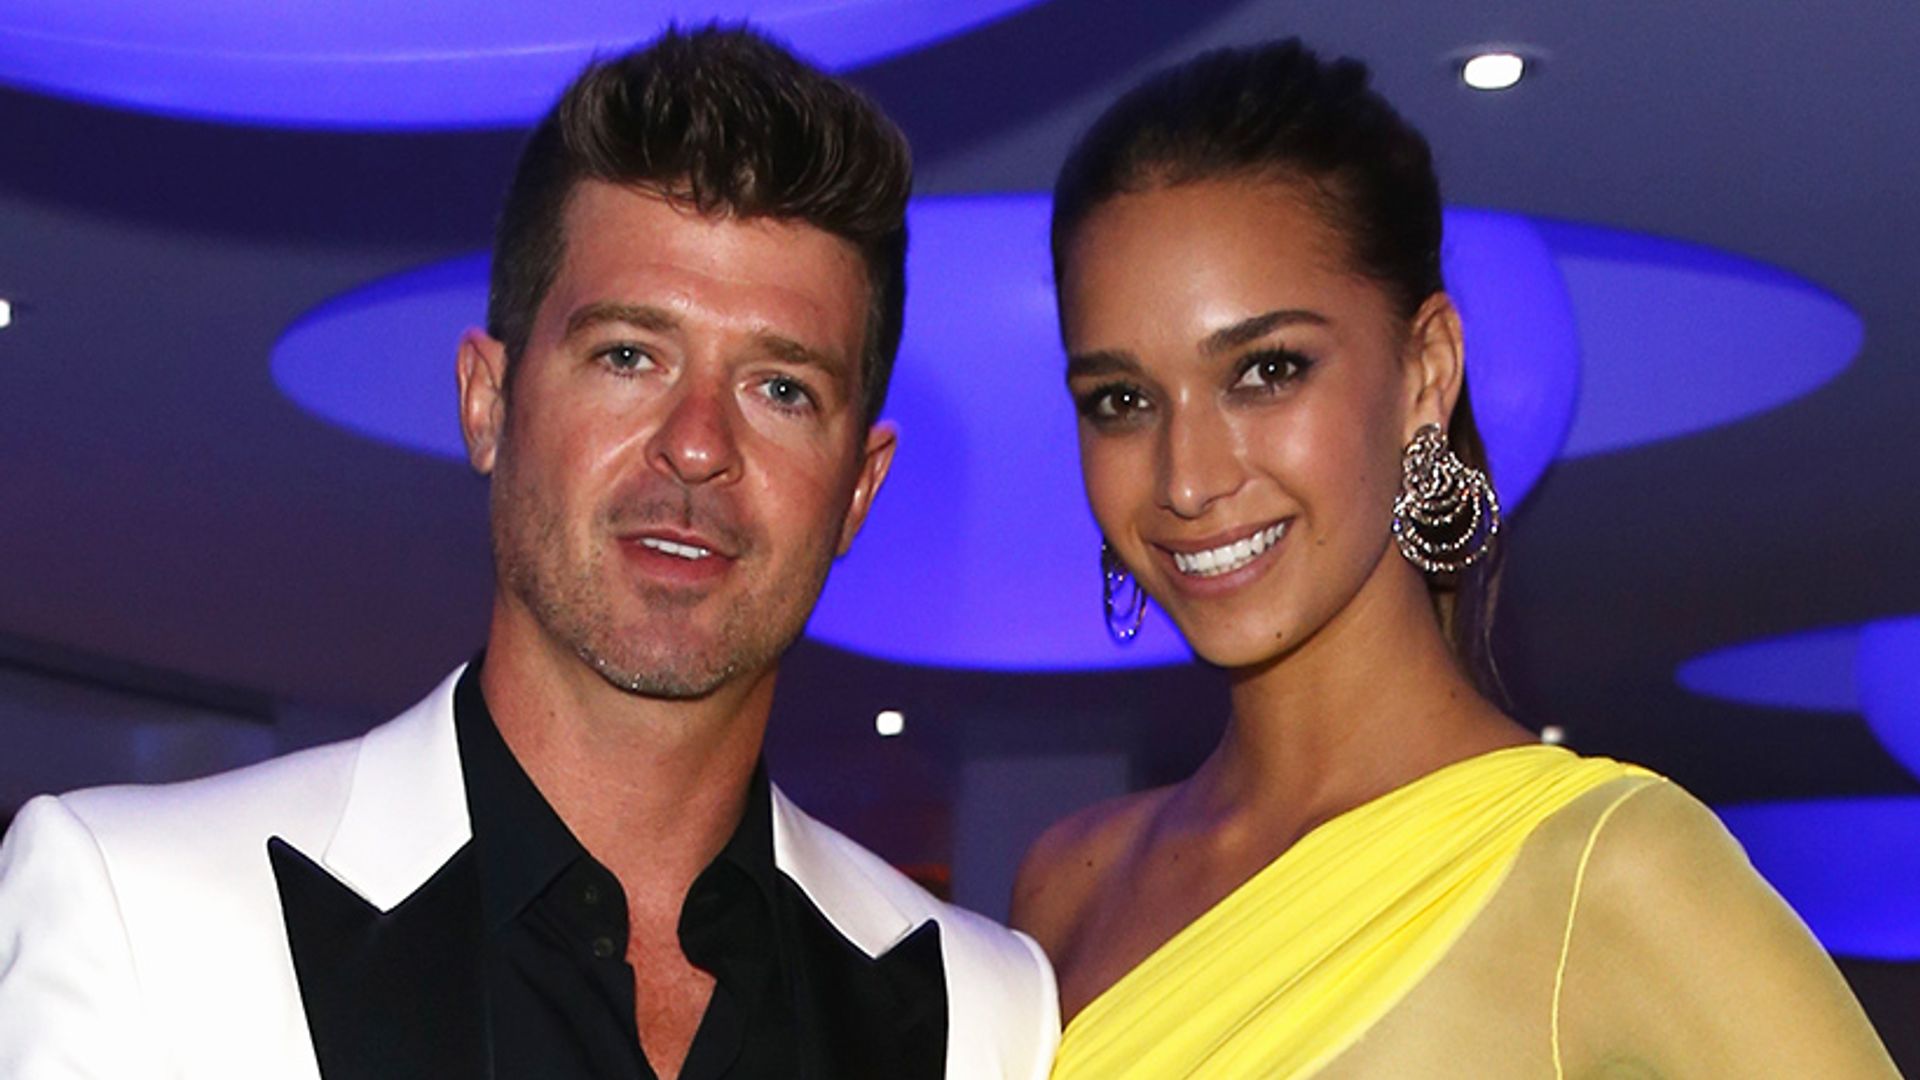 Robin Thicke, 40, and girlfriend, 22, expecting a baby – on his late dad's birthday